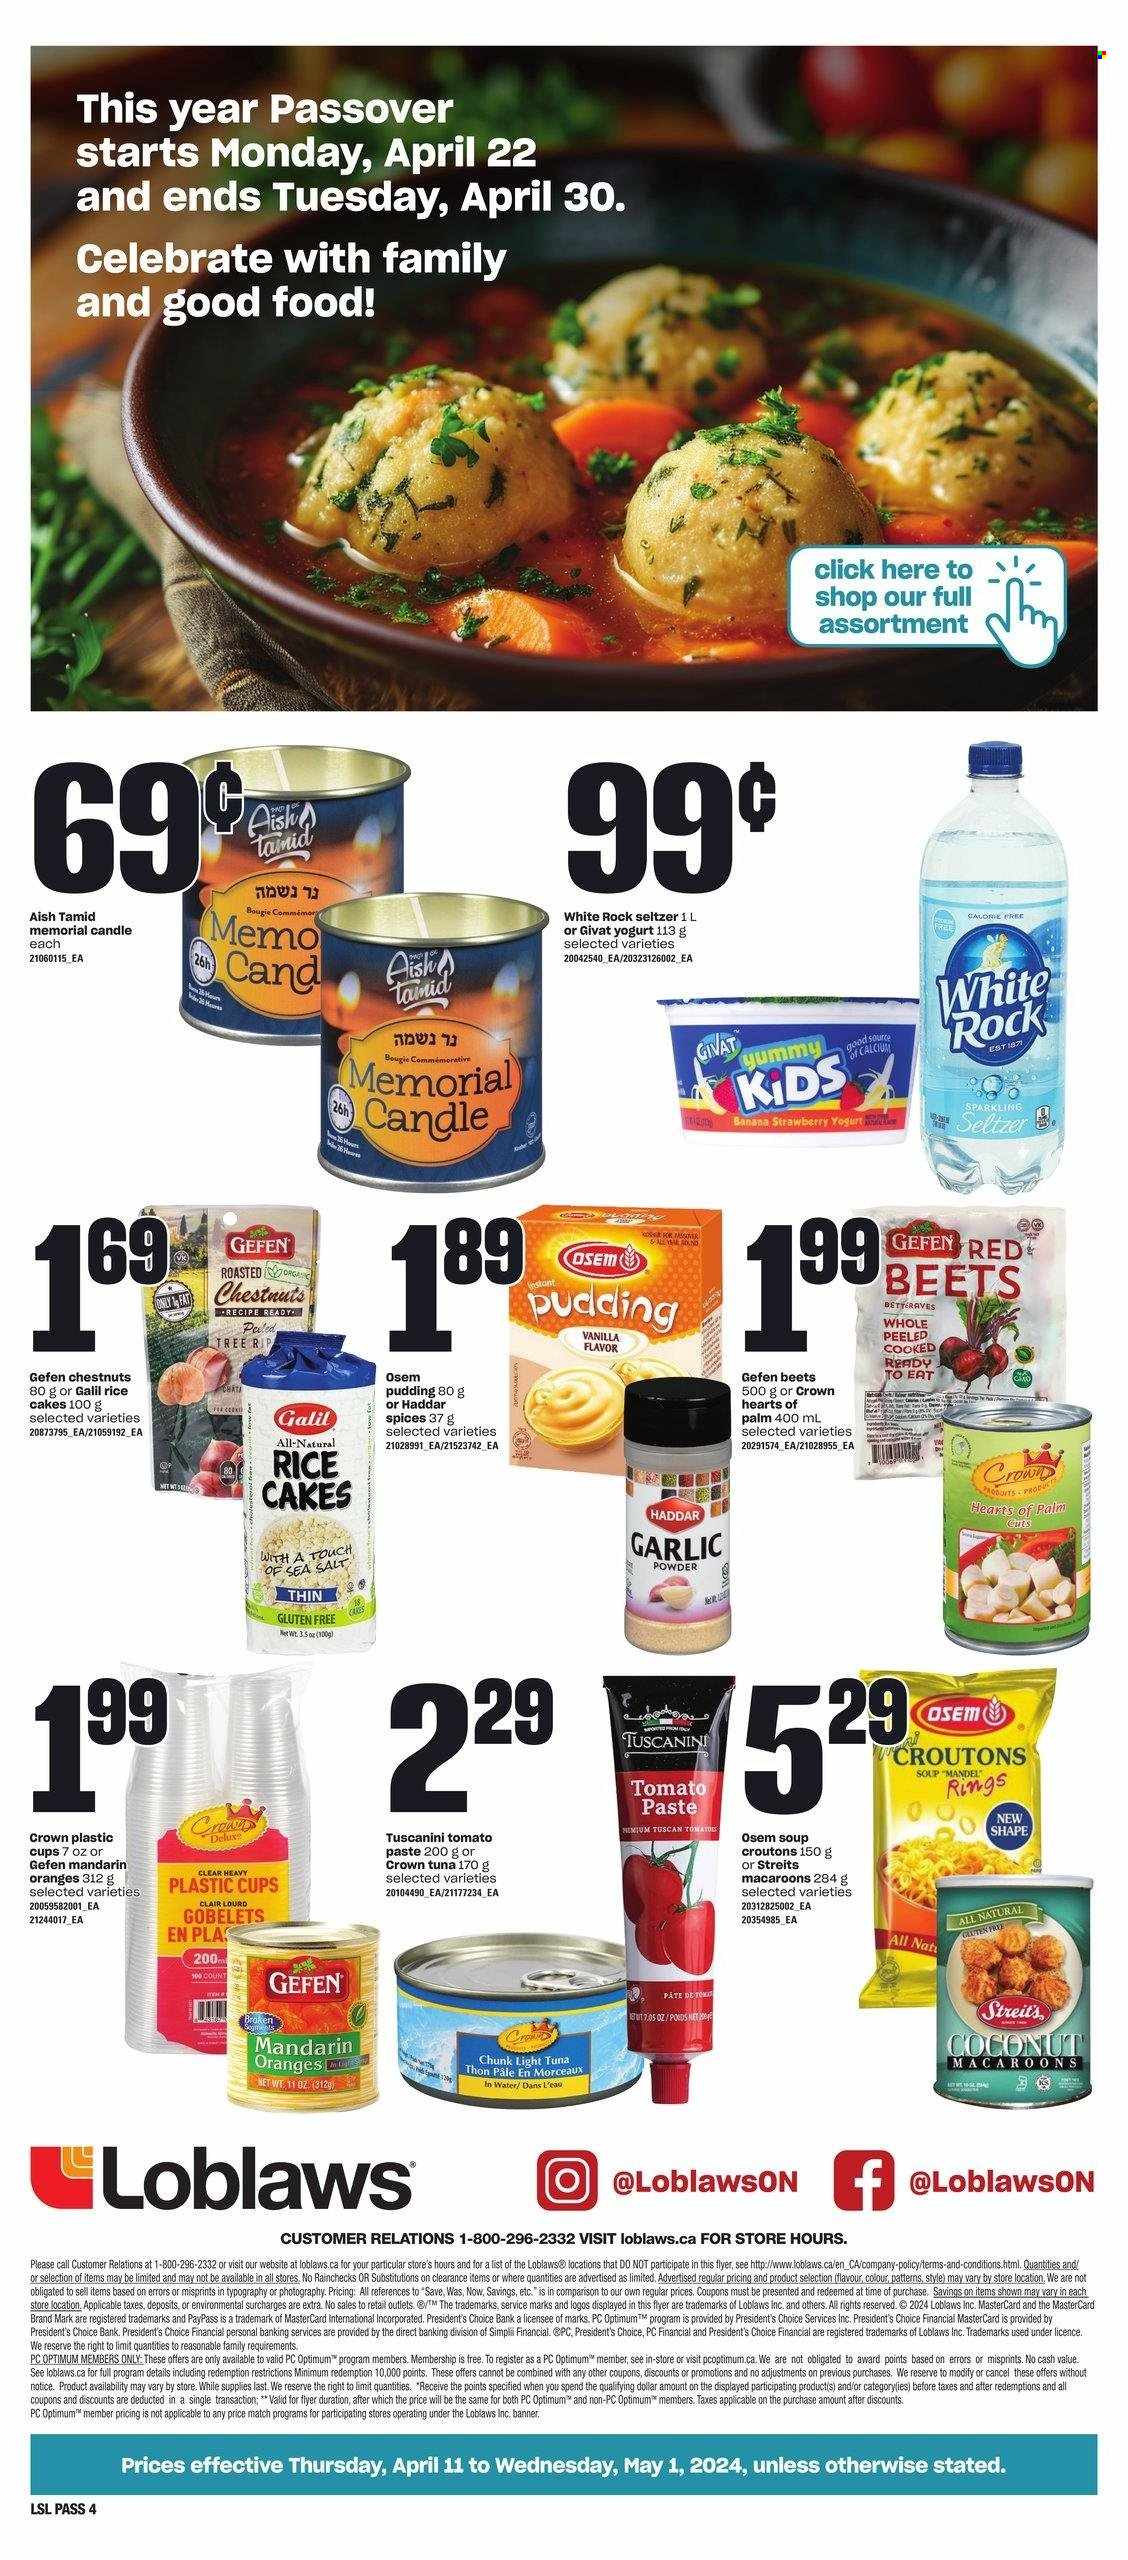 thumbnail - Loblaws Flyer - April 11, 2024 - May 01, 2024 - Sales products - macaroons, rice cakes, hearts of palm, beetroot, mandarines, tuna, soup, pâté, pudding, yoghurt, croutons, canned tuna, tomato paste, light tuna, canned fish, garlic powder, chestnuts, seltzer water, candle, palm. Page 4.